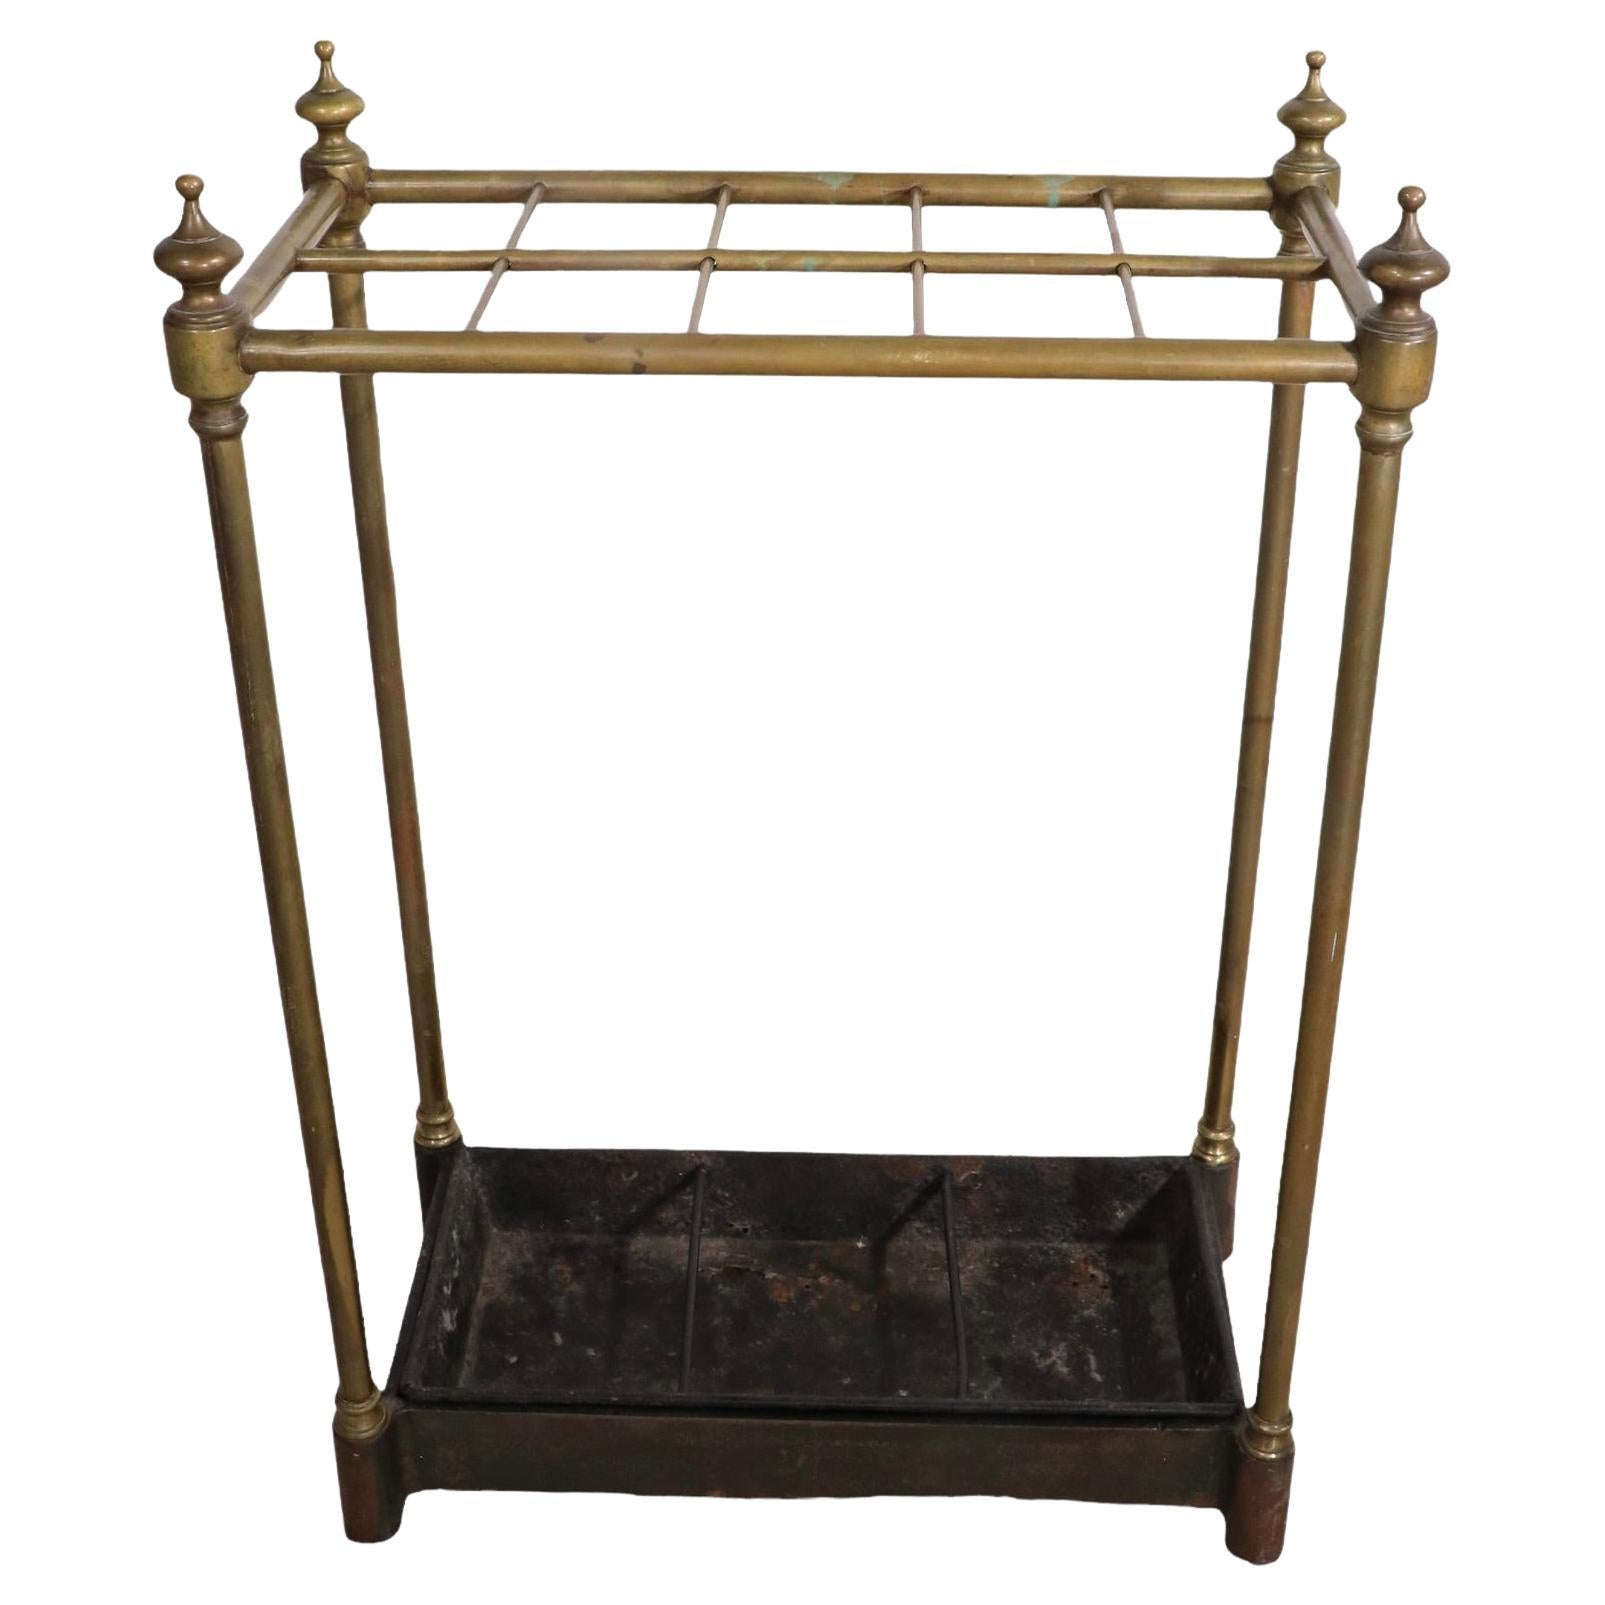 Architectural Brass and Iron Cane Umbrella Stand